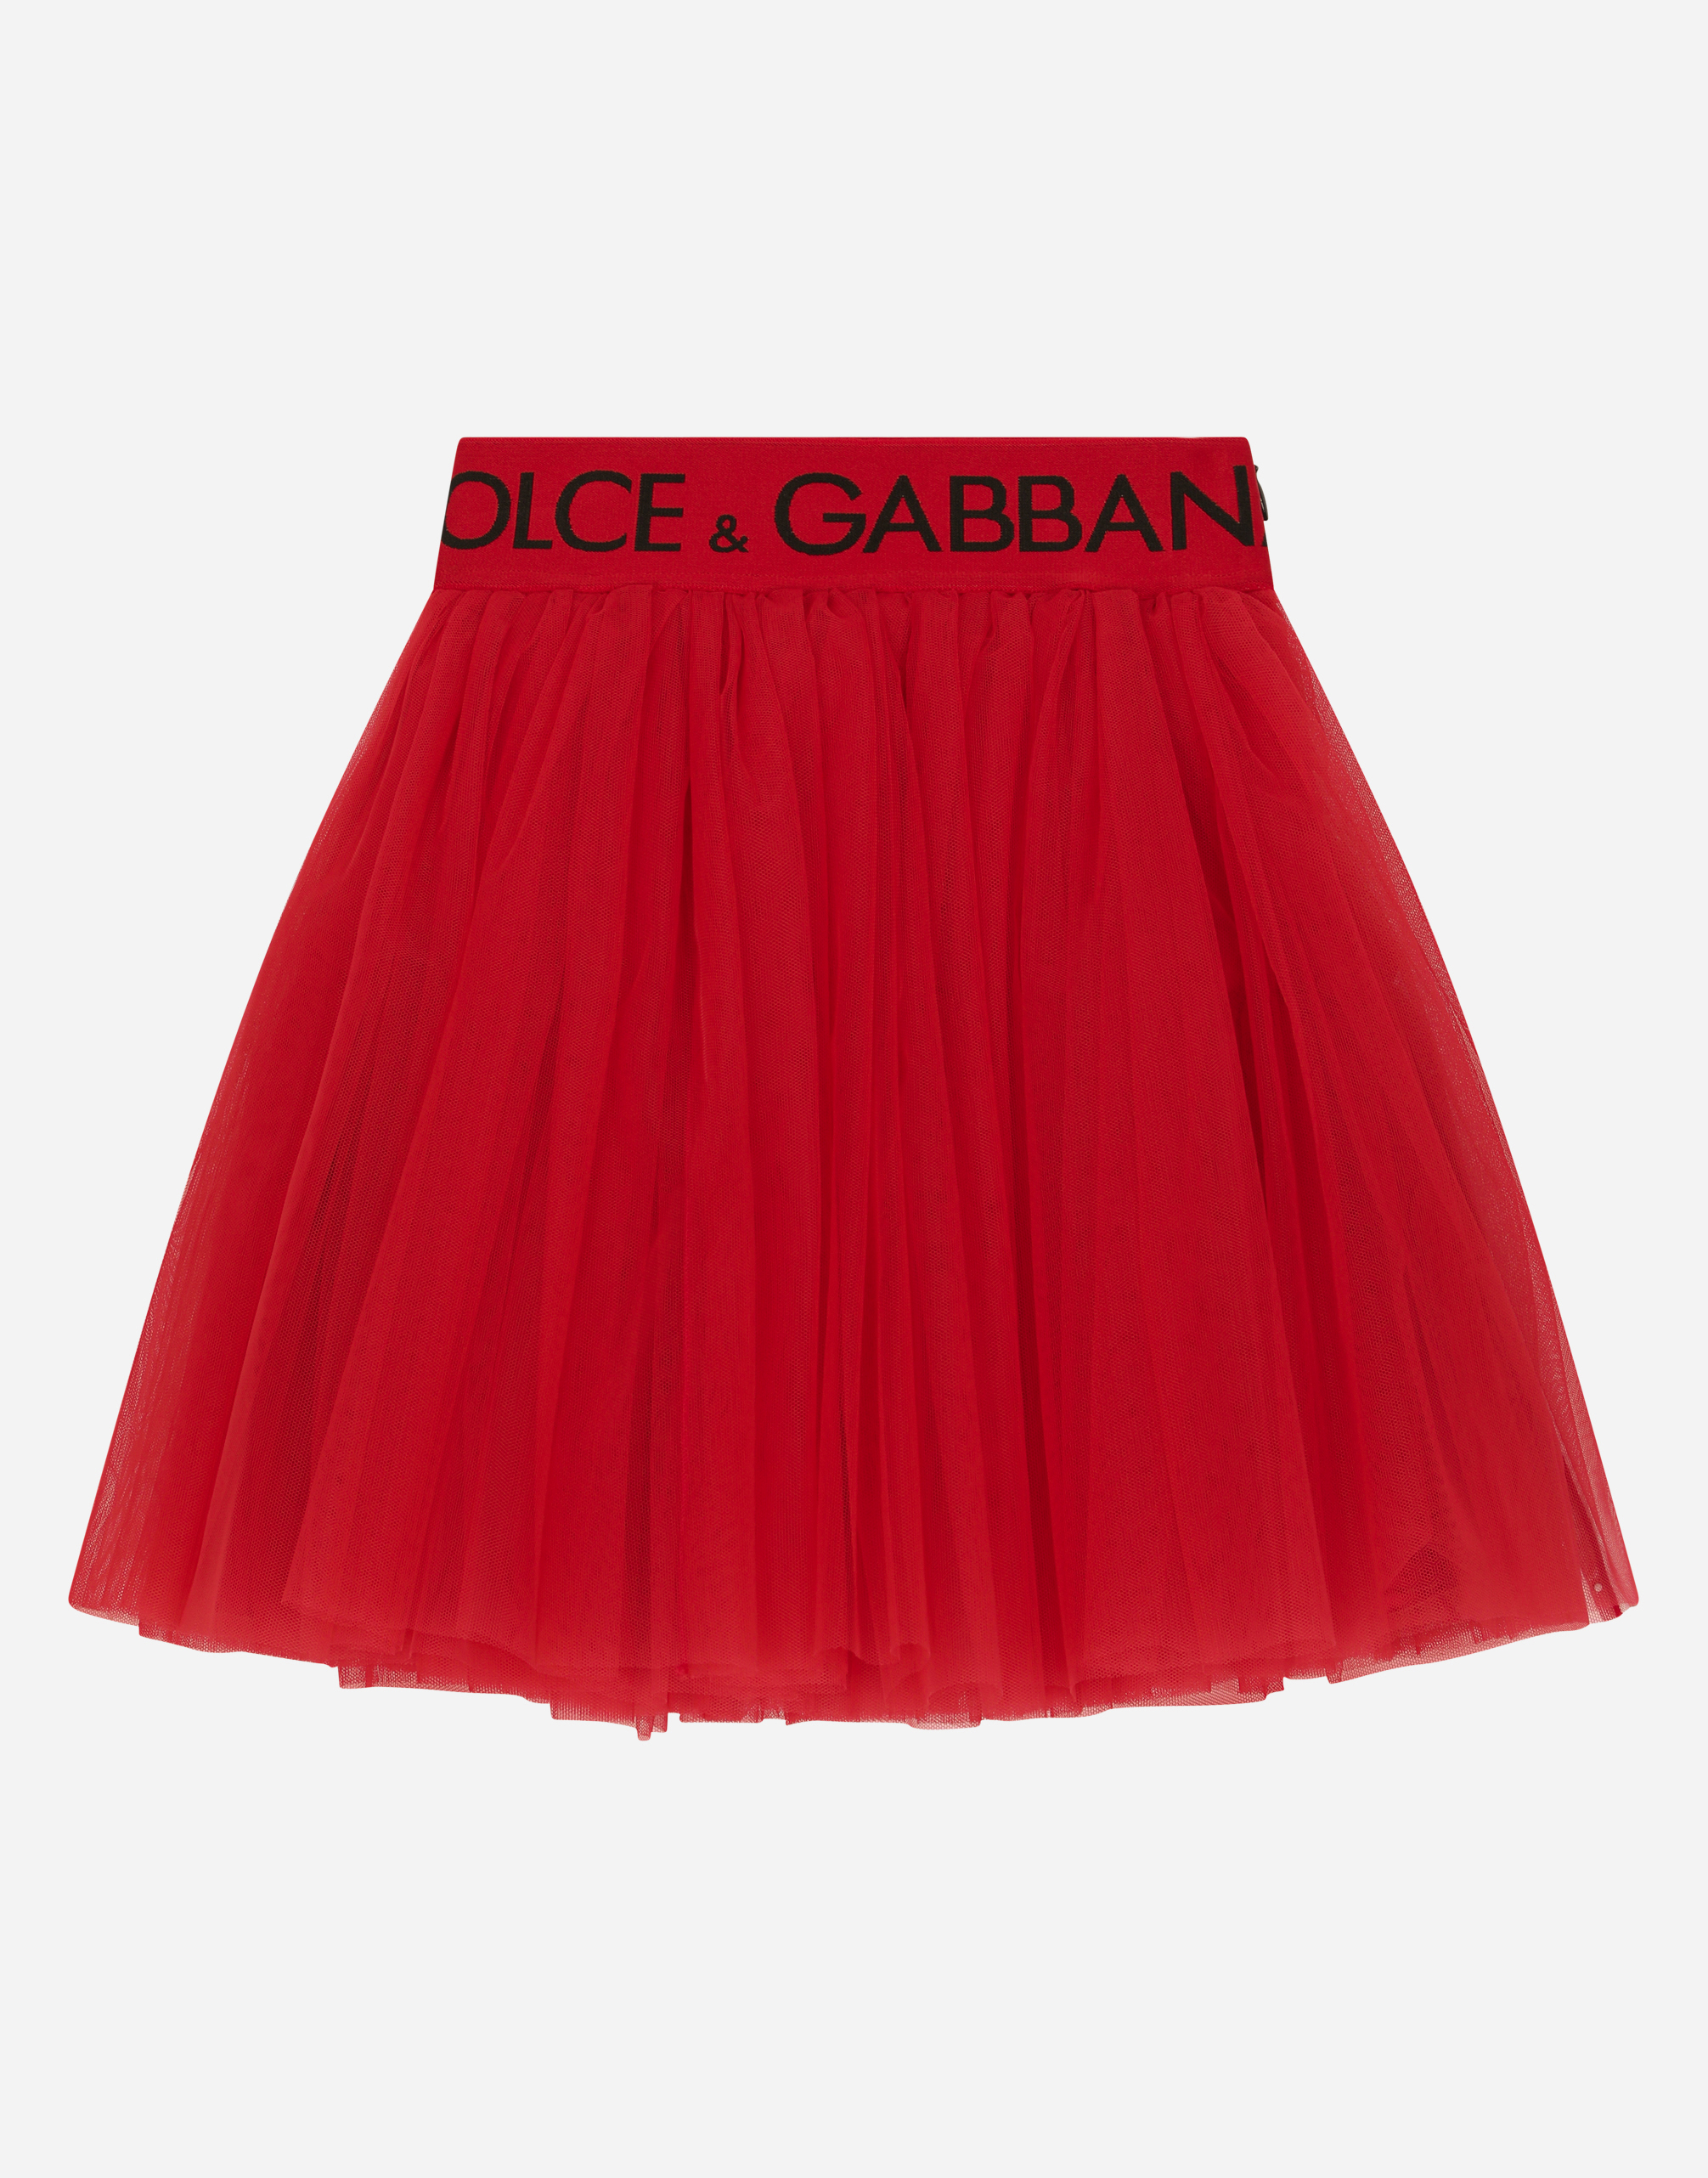 DOLCE & GABBANA MULTI-LAYERED TULLE MIDI SKIRT WITH BRANDED ELASTIC